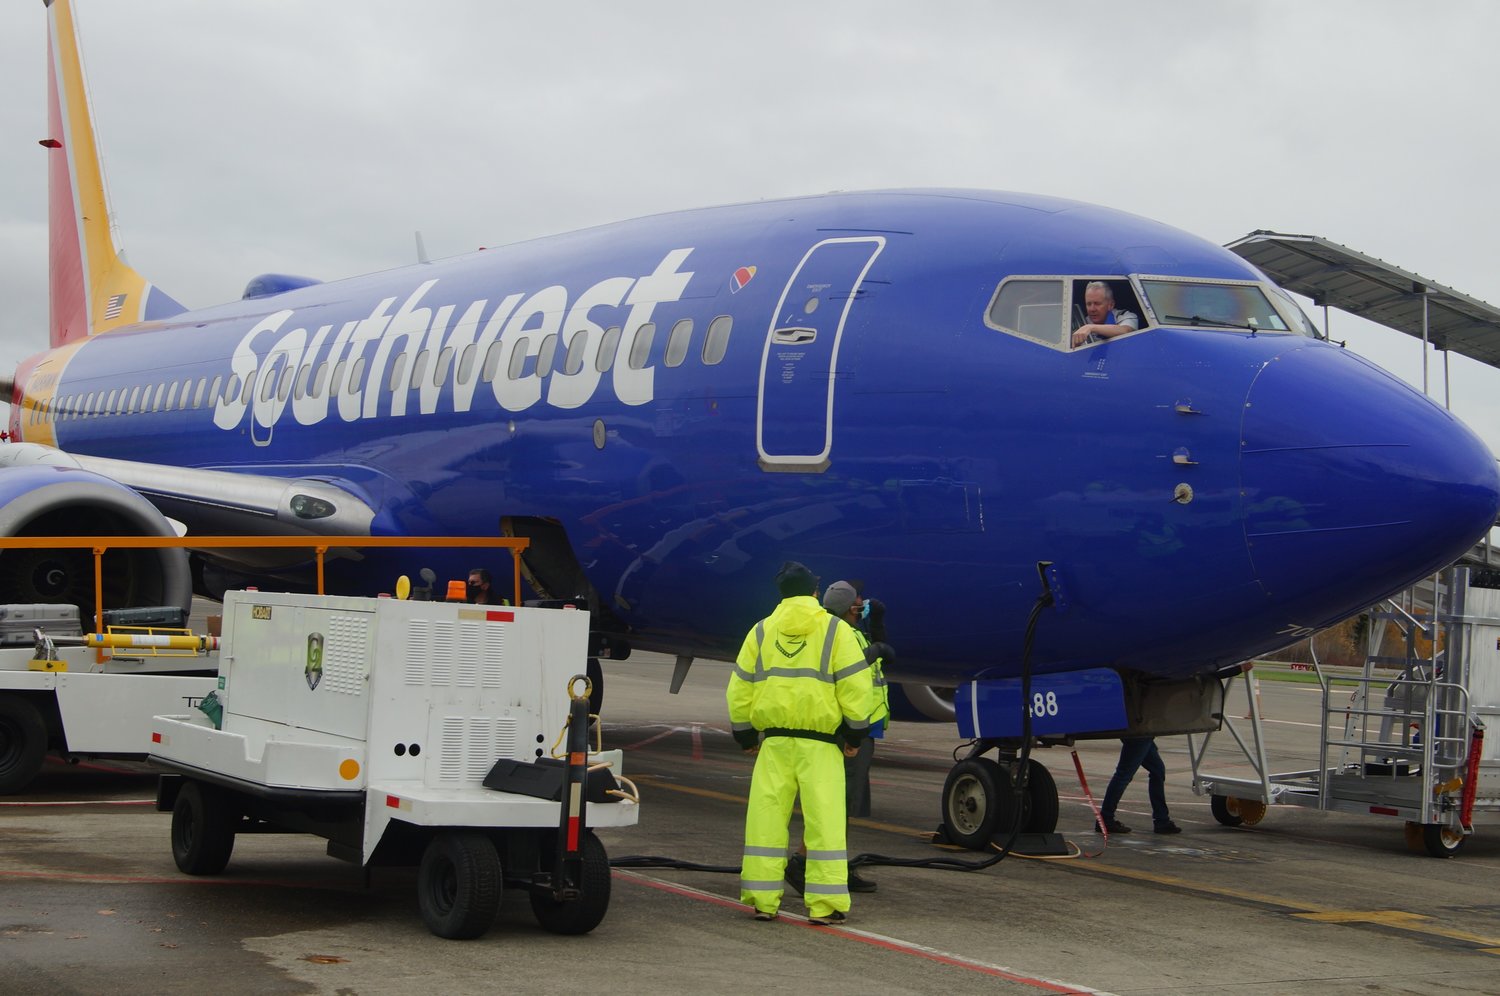 Southwest Airlines officials, Port of Bellingham commissioners and Bellingham mayor Seth Fleetwood celebrated the international airline’s first flight into Bellingham International Airport on November 7, 2021. Arriving passengers were met with a water cannon and terminal festivities.